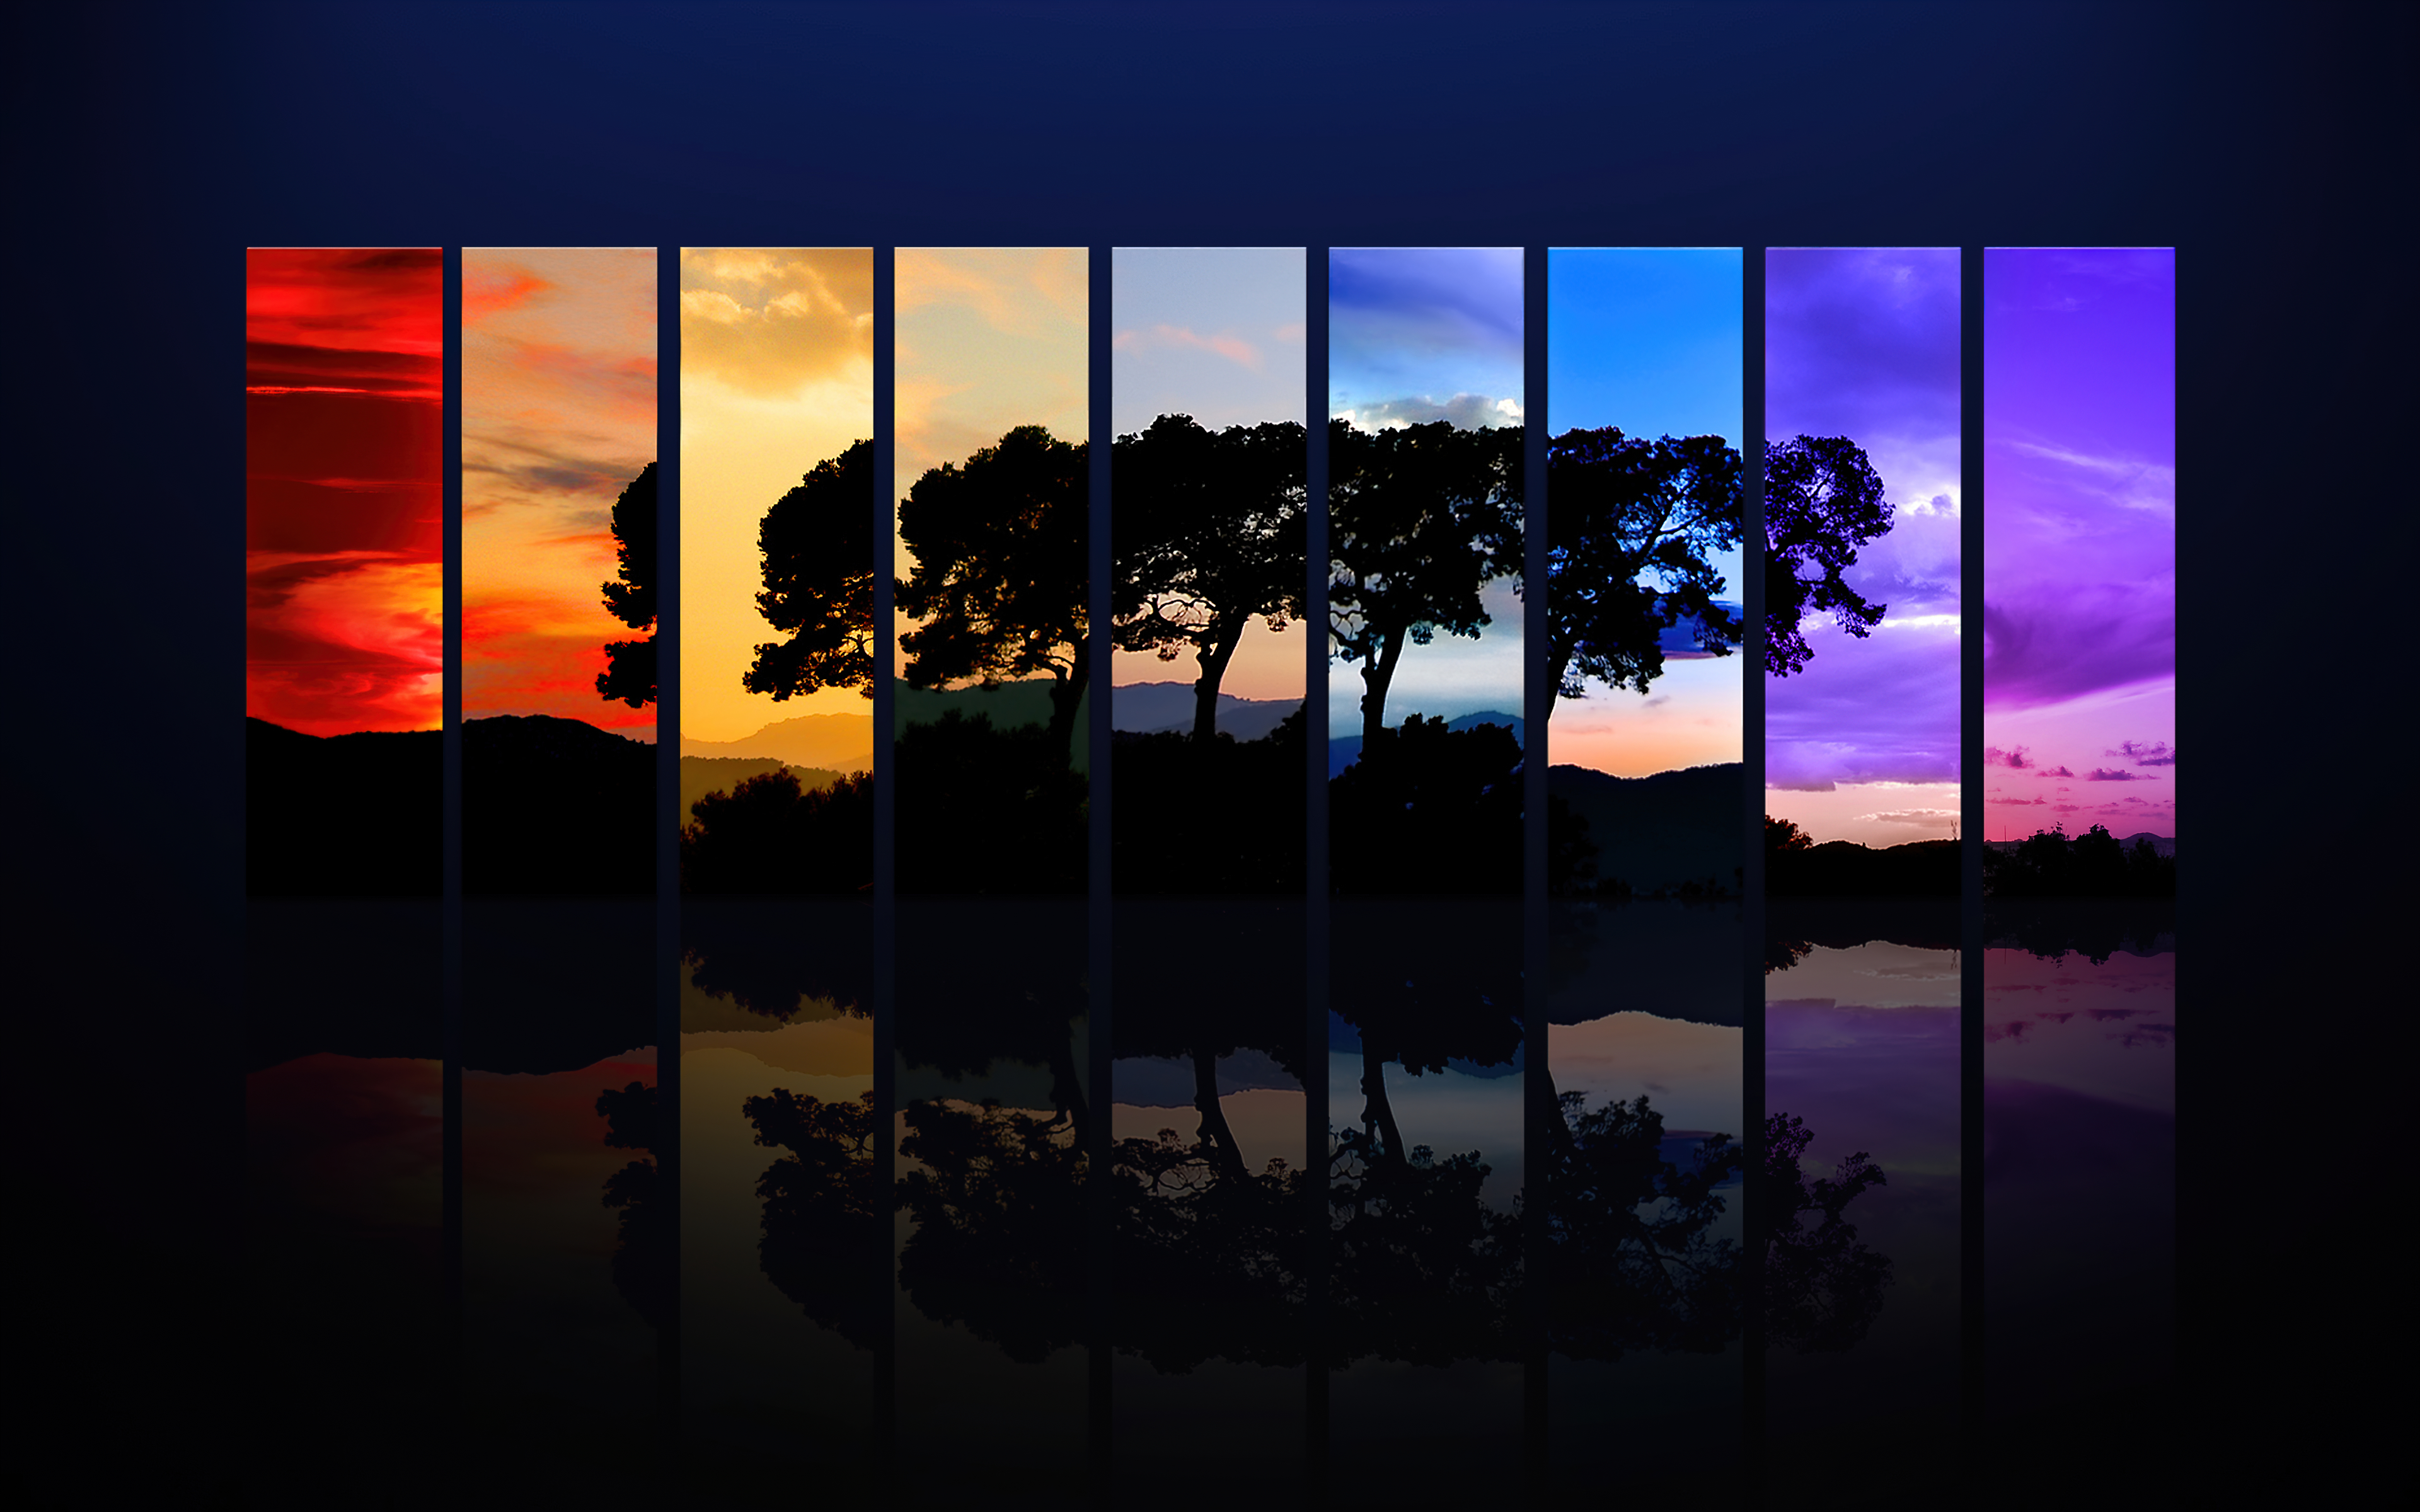 A landscape image is divided into 12 equal sections, each a different color. - Sunrise